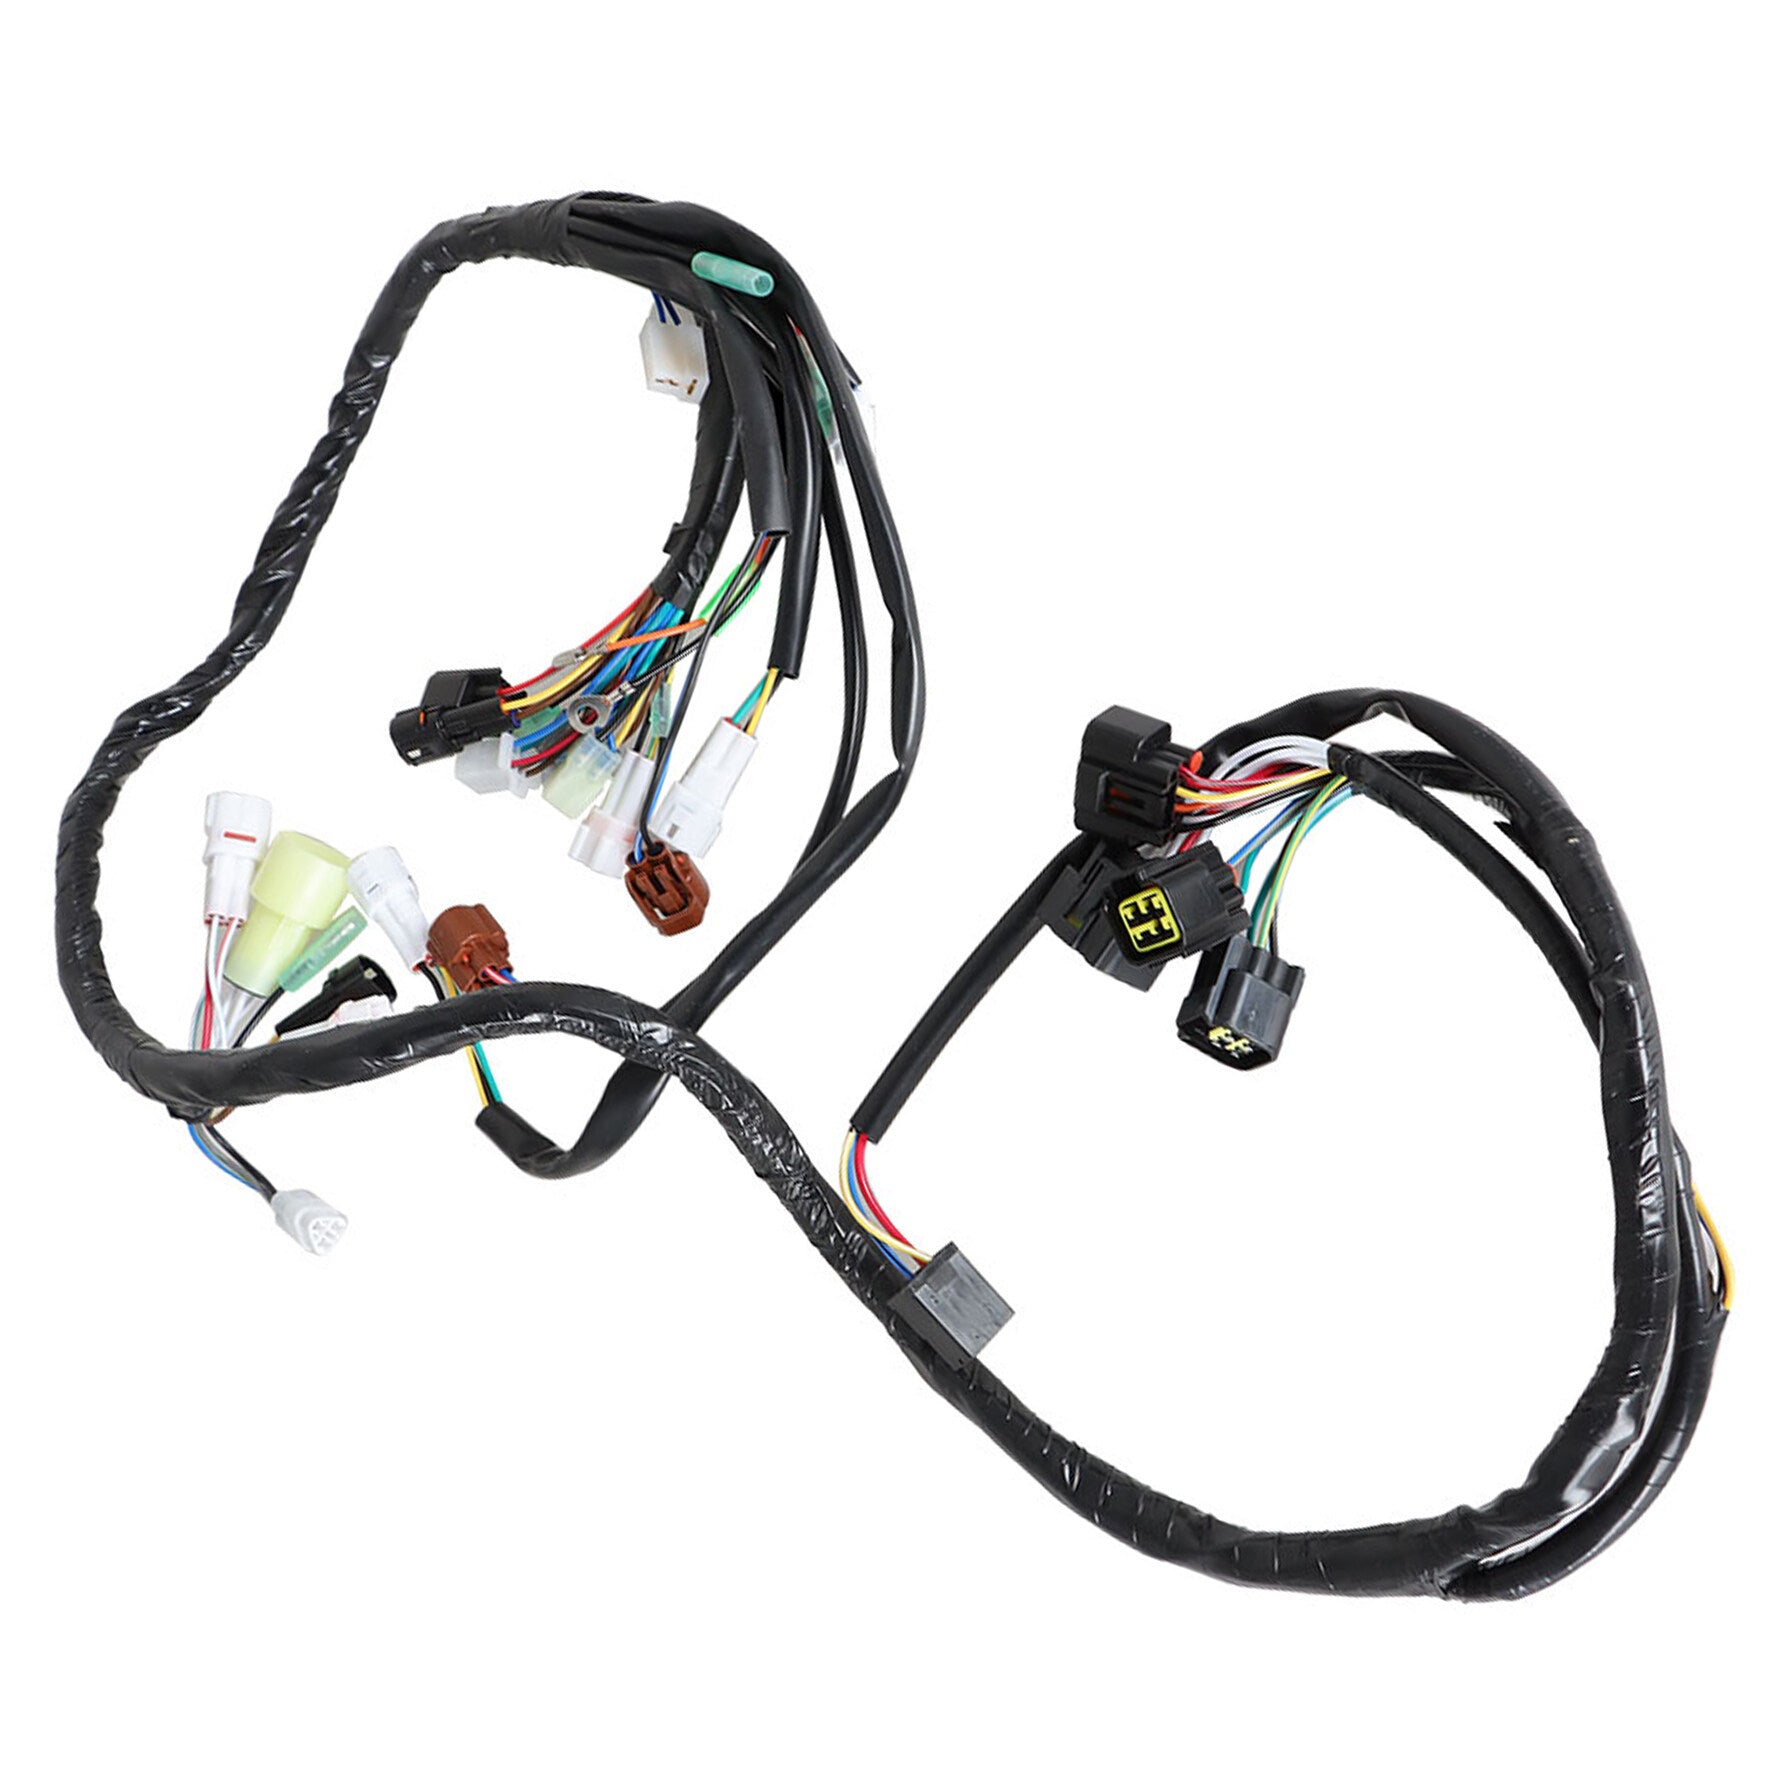 labwork Electrical Wiring Wire Harness Replacement for Yamaha Raptor 660 660R YFM660R 2002-2004 5LP-82590-10-00